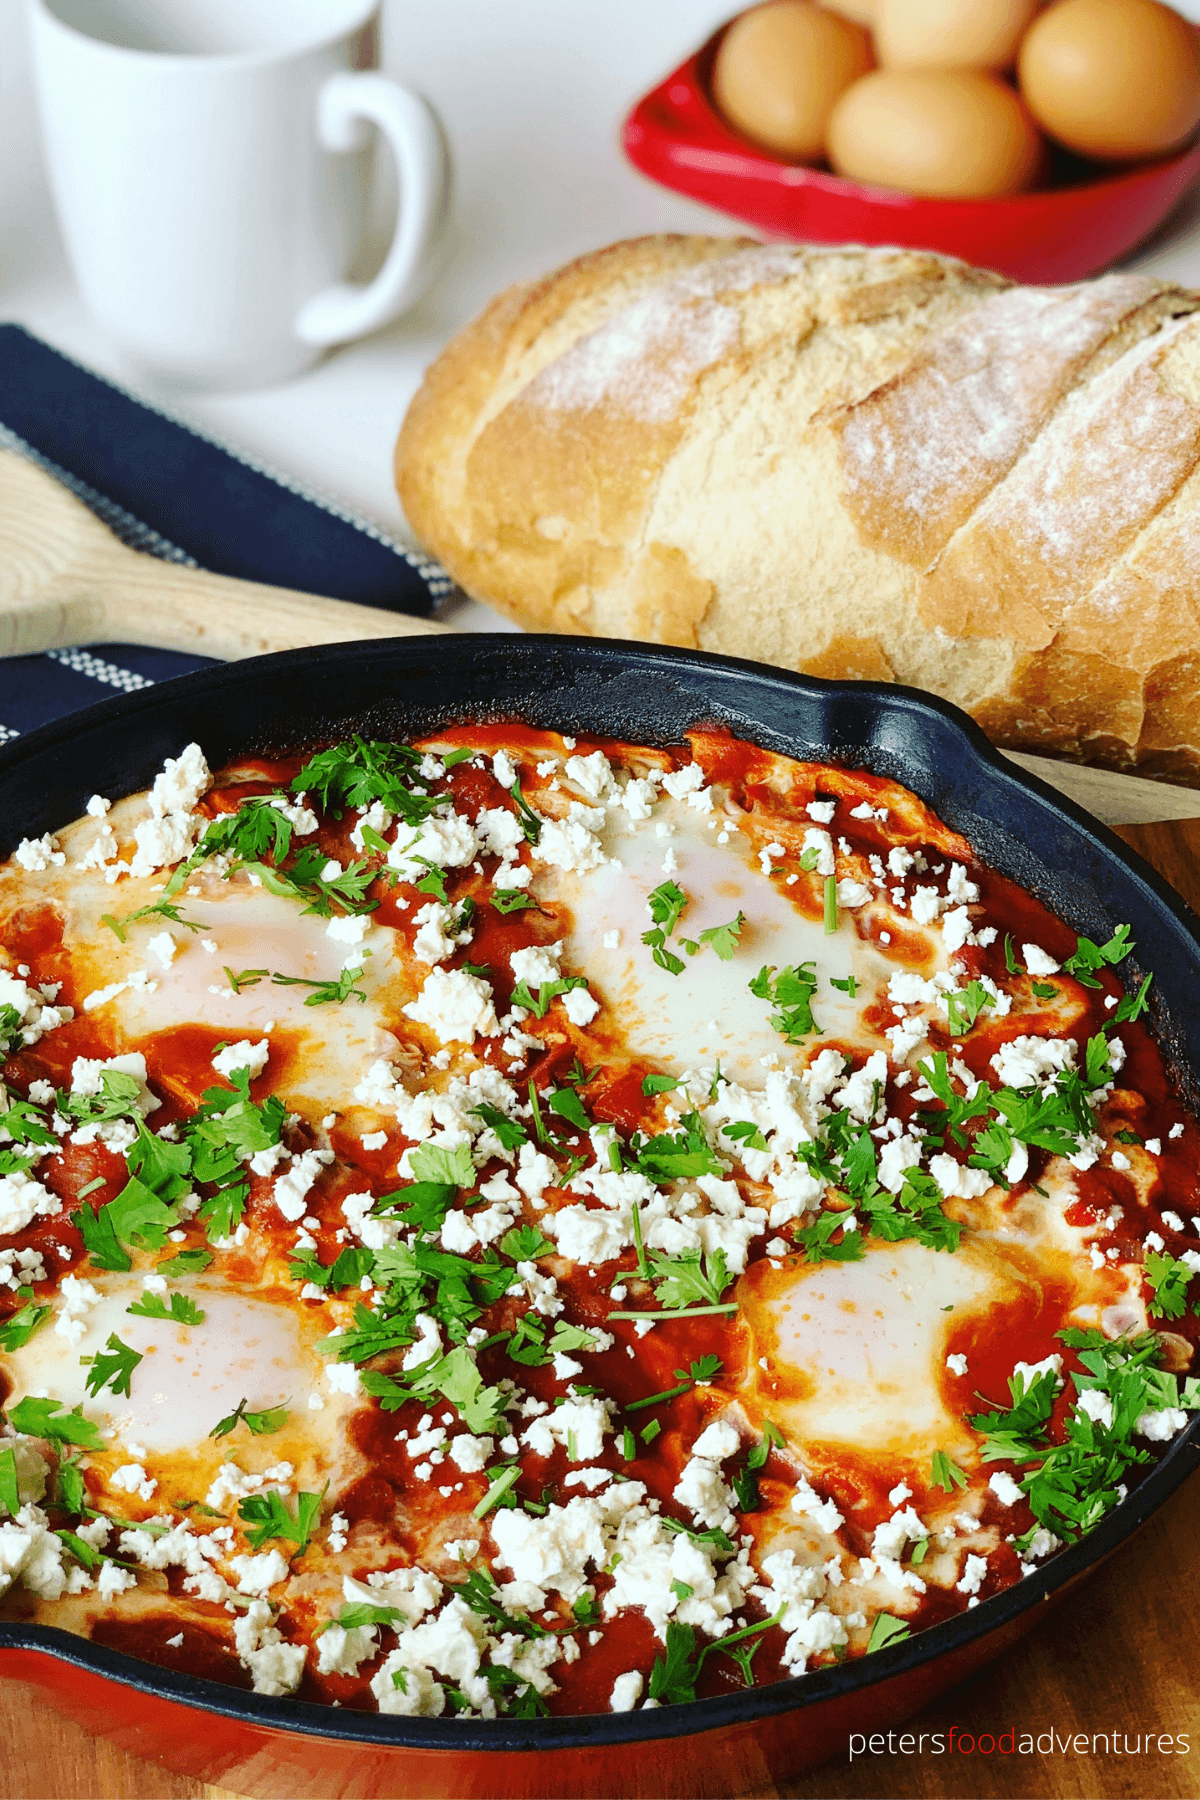 This Shakshuka recipe is one of my favorite Middle Eastern meals. Colorful, spicy and delicious. An simple dish with everyday ingredients your family will love. Eggs in Tomato Sauce, perfect for breakfast, brunch or dinner.